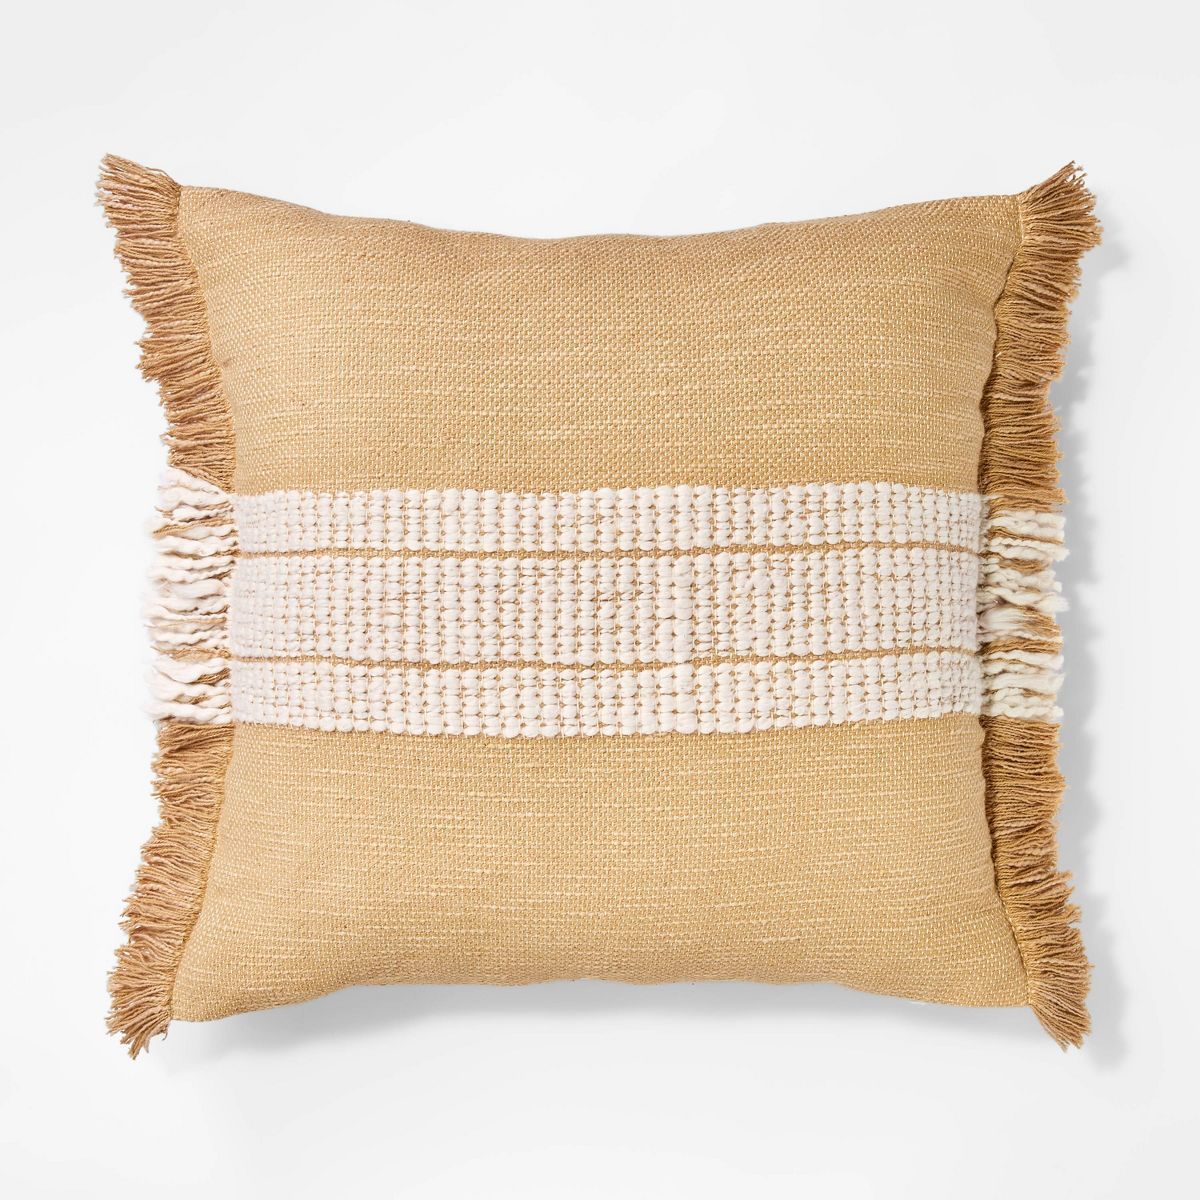 Woven Striped Square Throw Pillow Neutral/Cream - Threshold™ designed with Studio McGee | Target